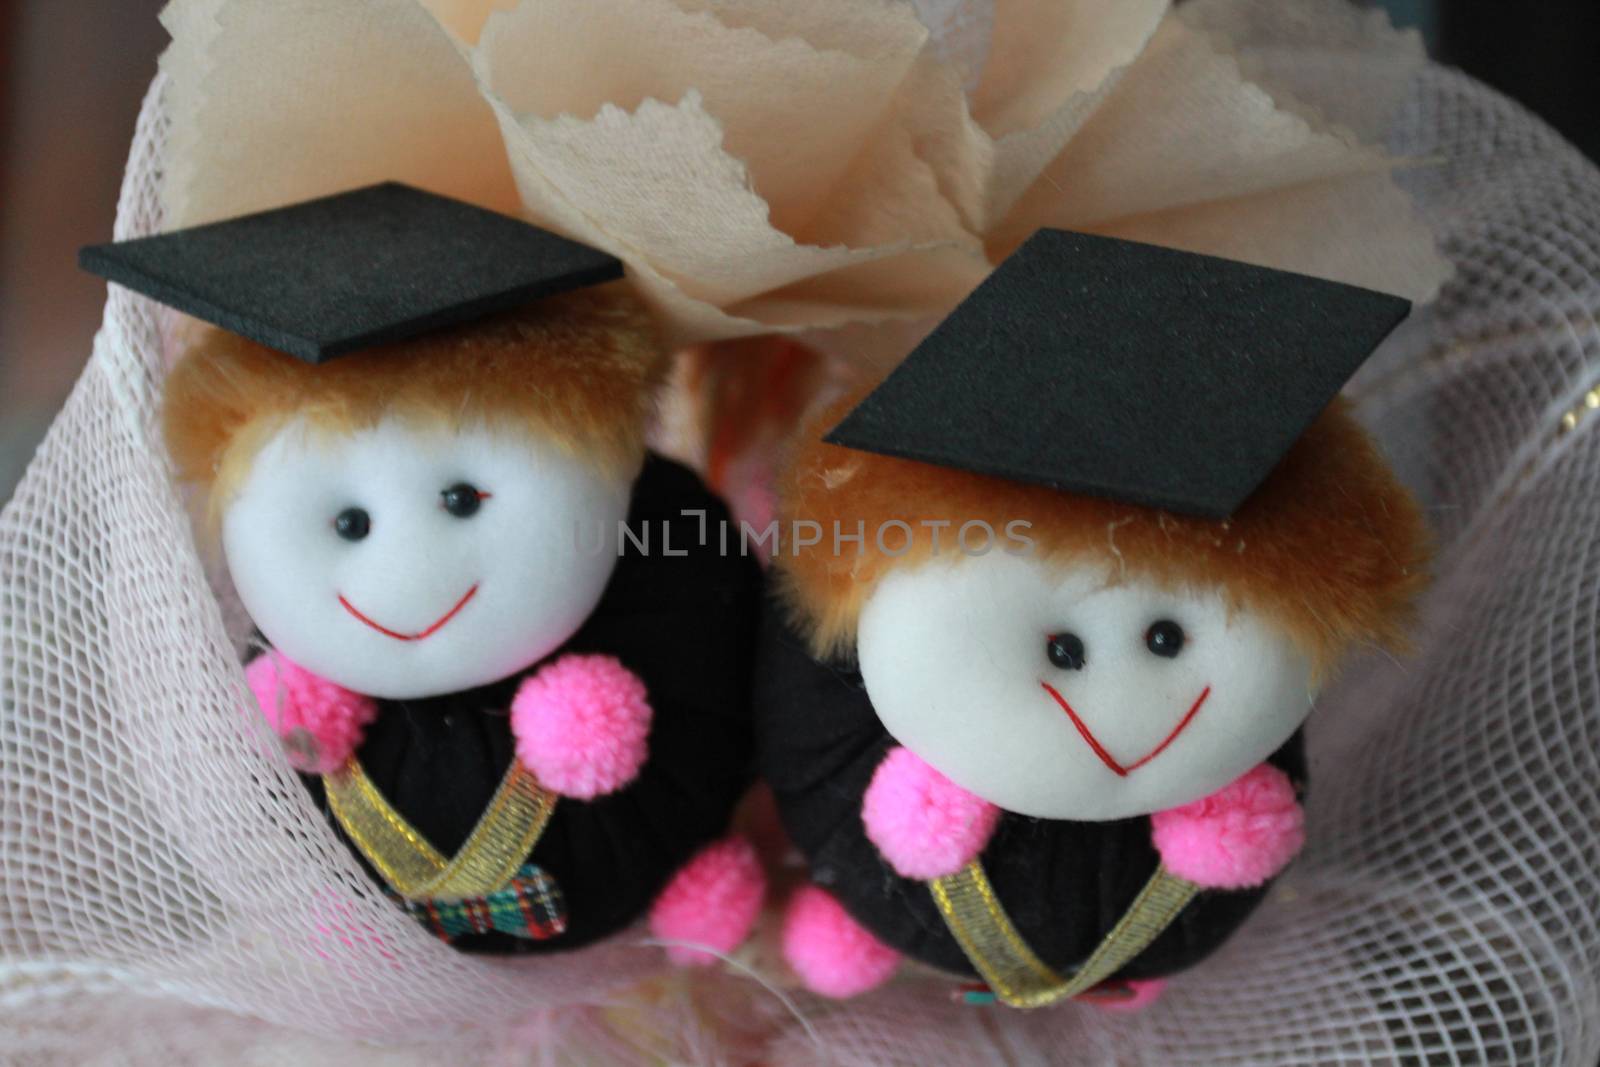 congreatulation dolls arrange with fabric.It is the gift for person who graduated.